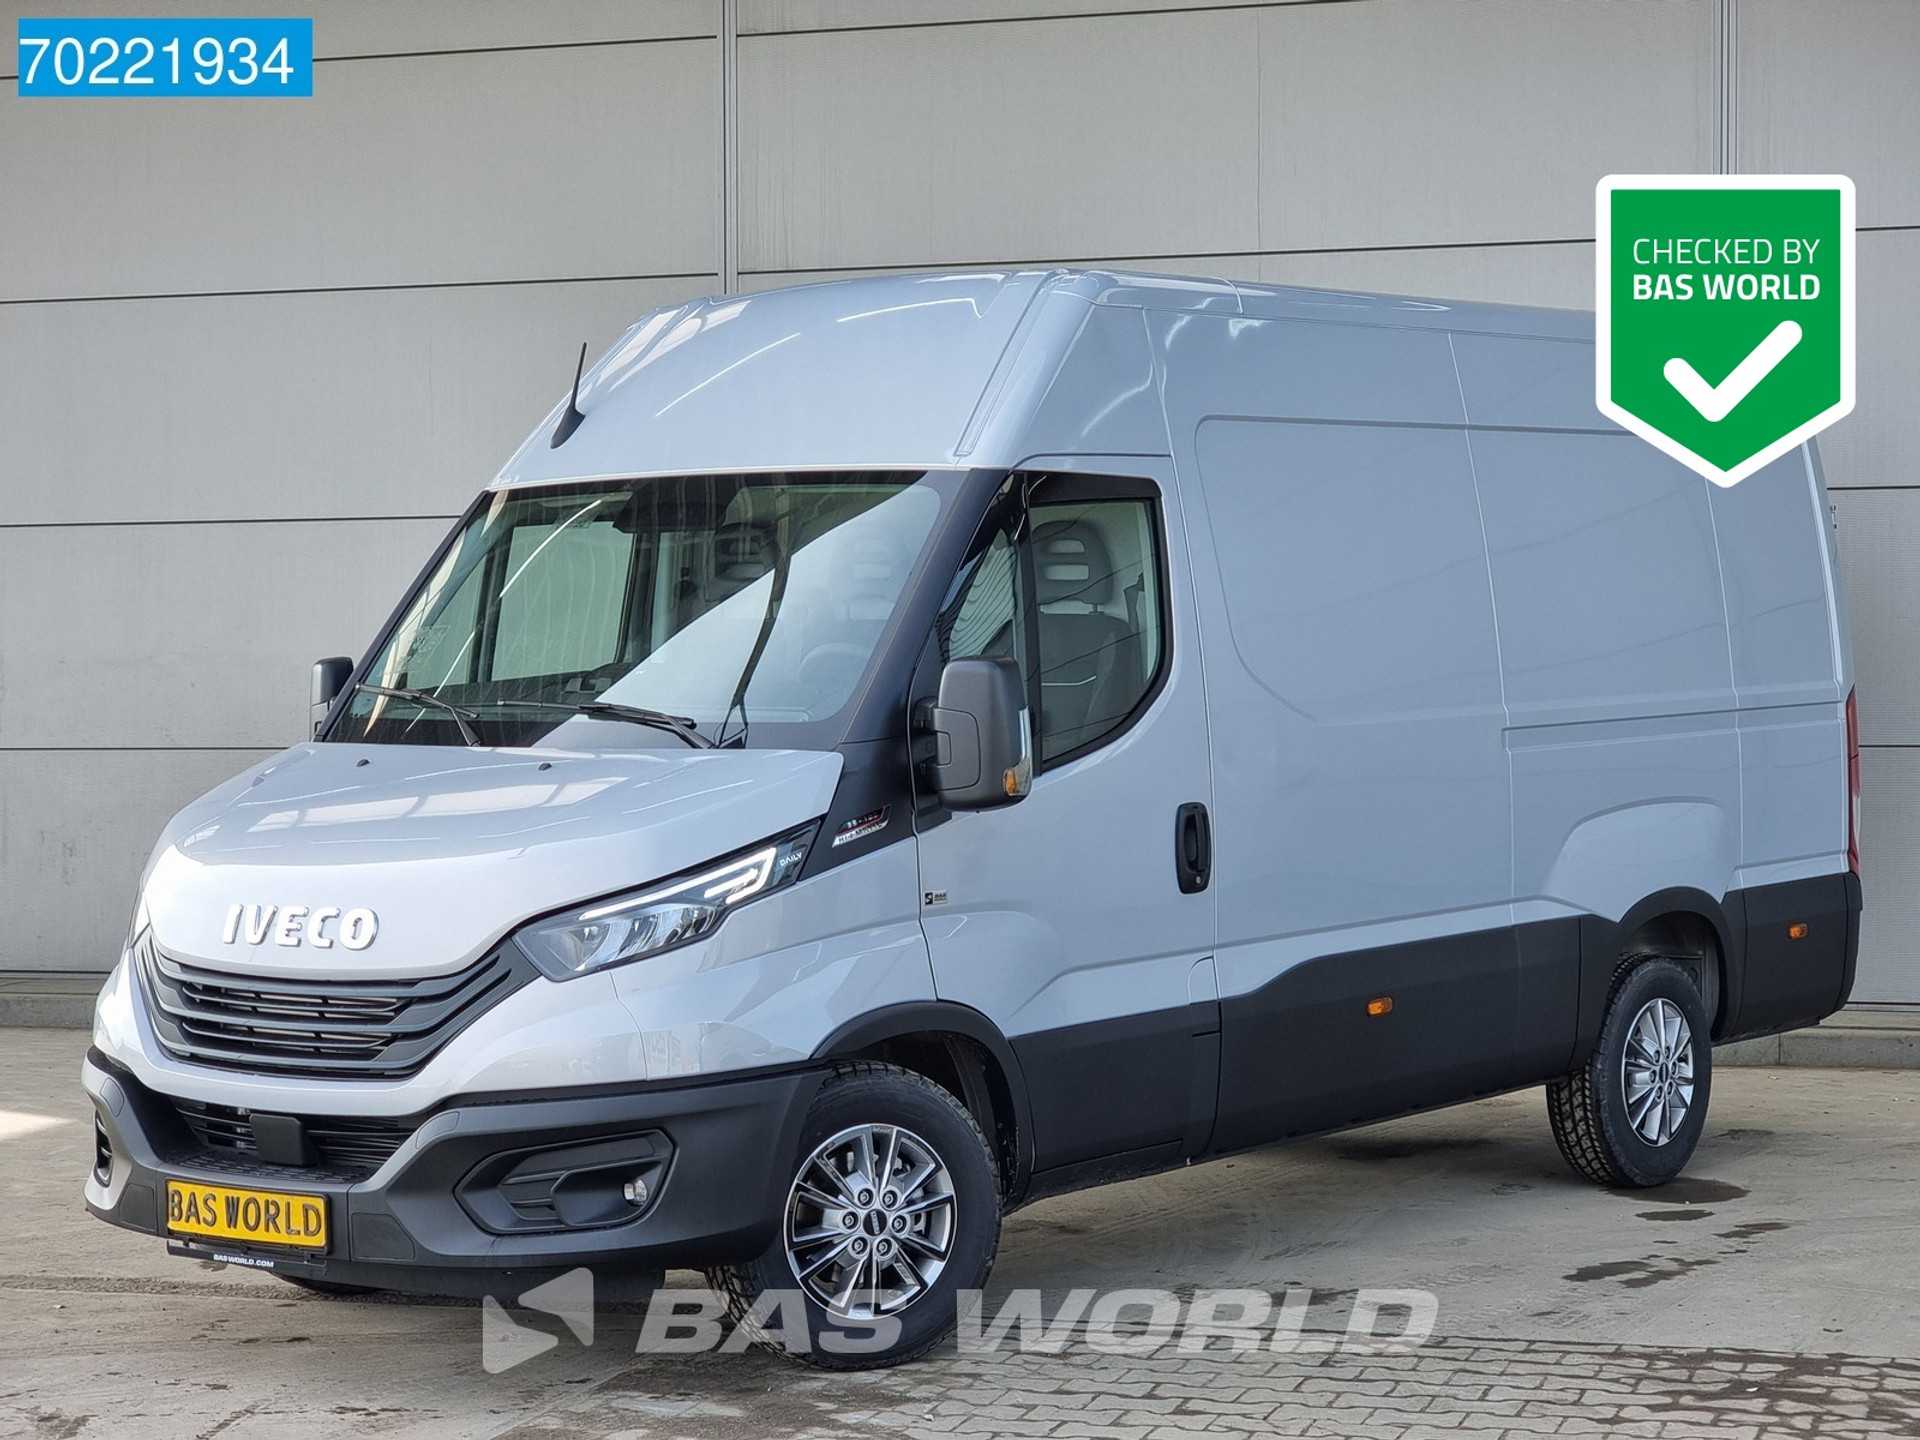 Iveco Daily 35S18 Automaat L2H2 LED ACC Navi Camera 12m3 Airco